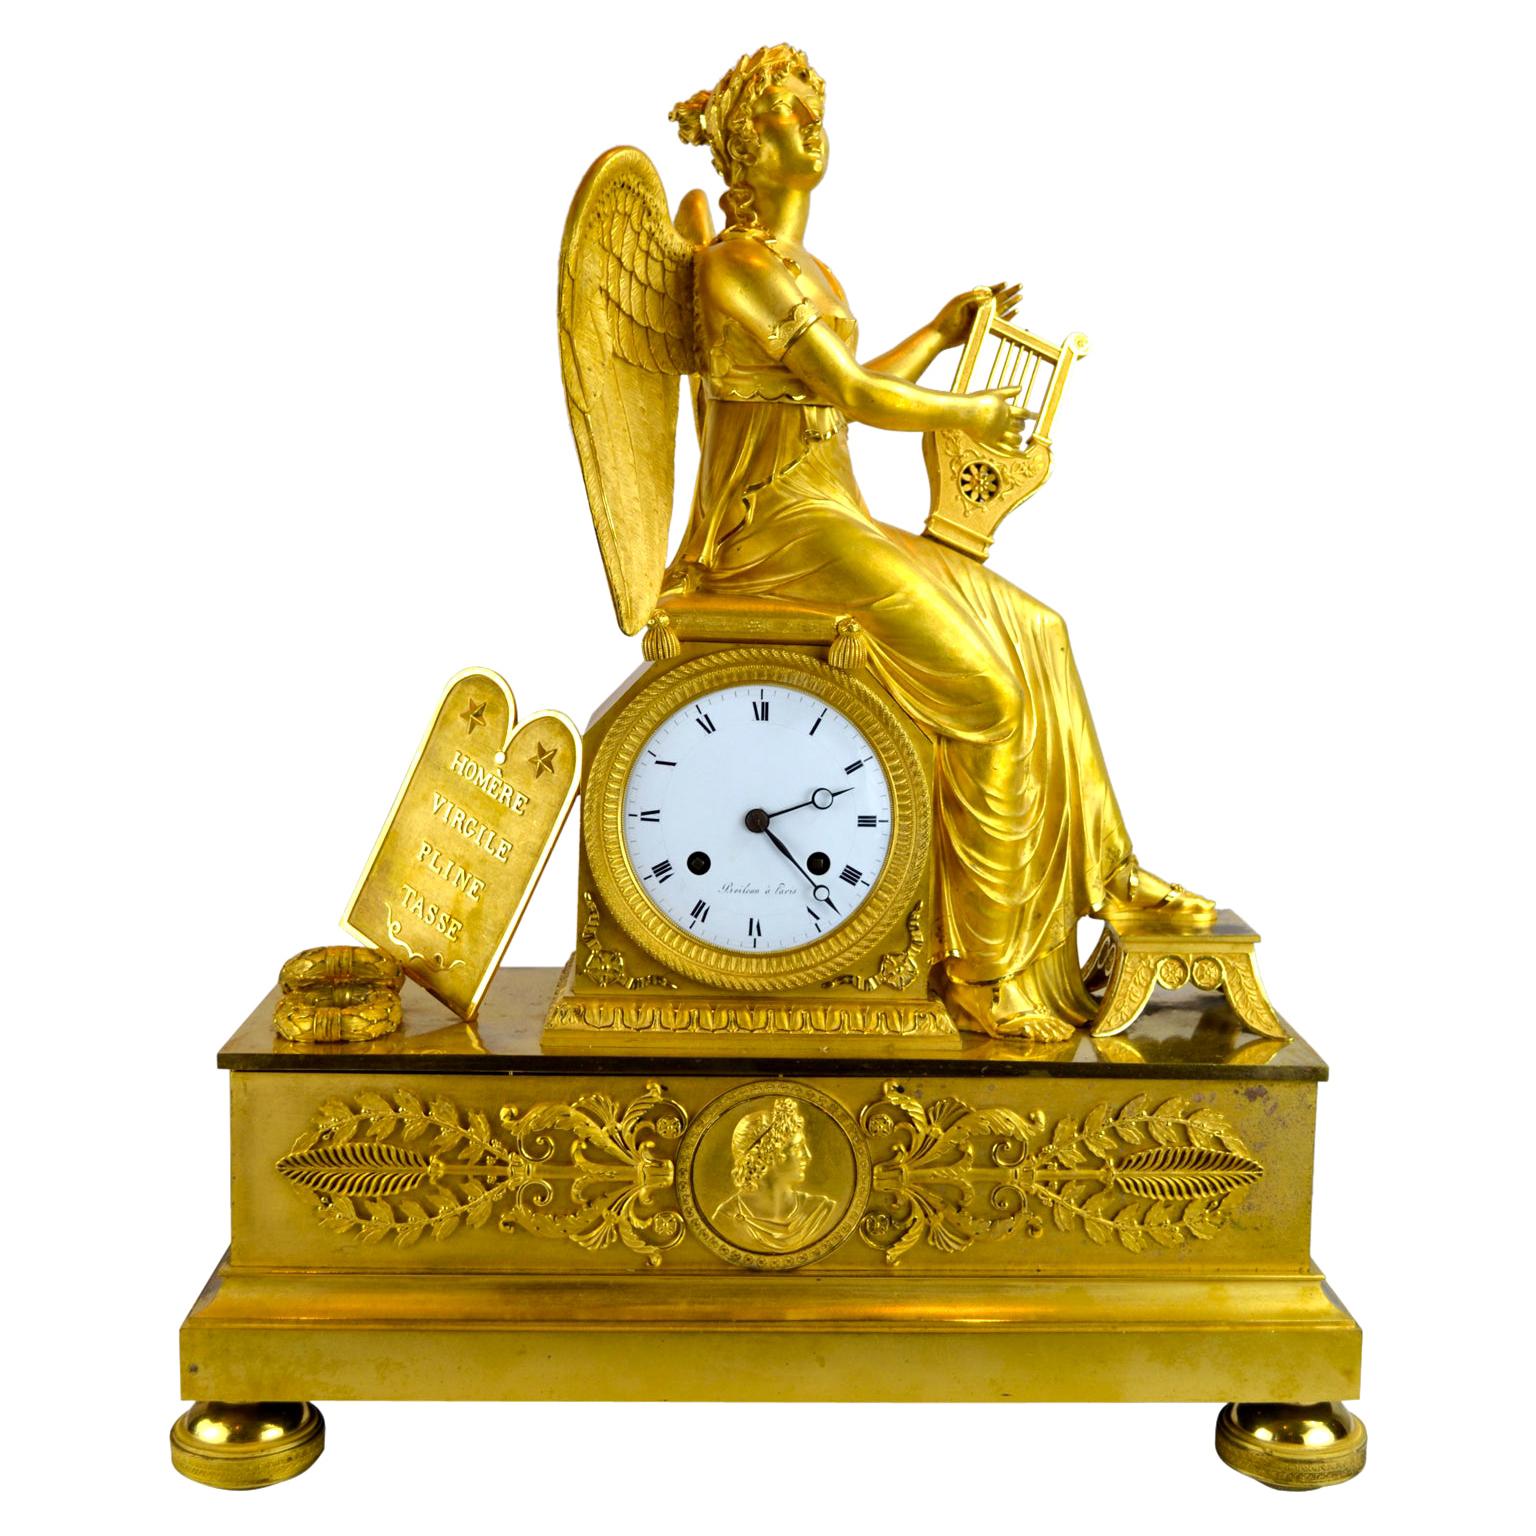 An Allegorical gilt bronze French Empire clock Depiction Clio, the the Greek Muse of History and Music. Clio is shown here sitting on the clock plinth playing her harp. To the left of the clock dial are placed wreaths, and a plaque with the names of